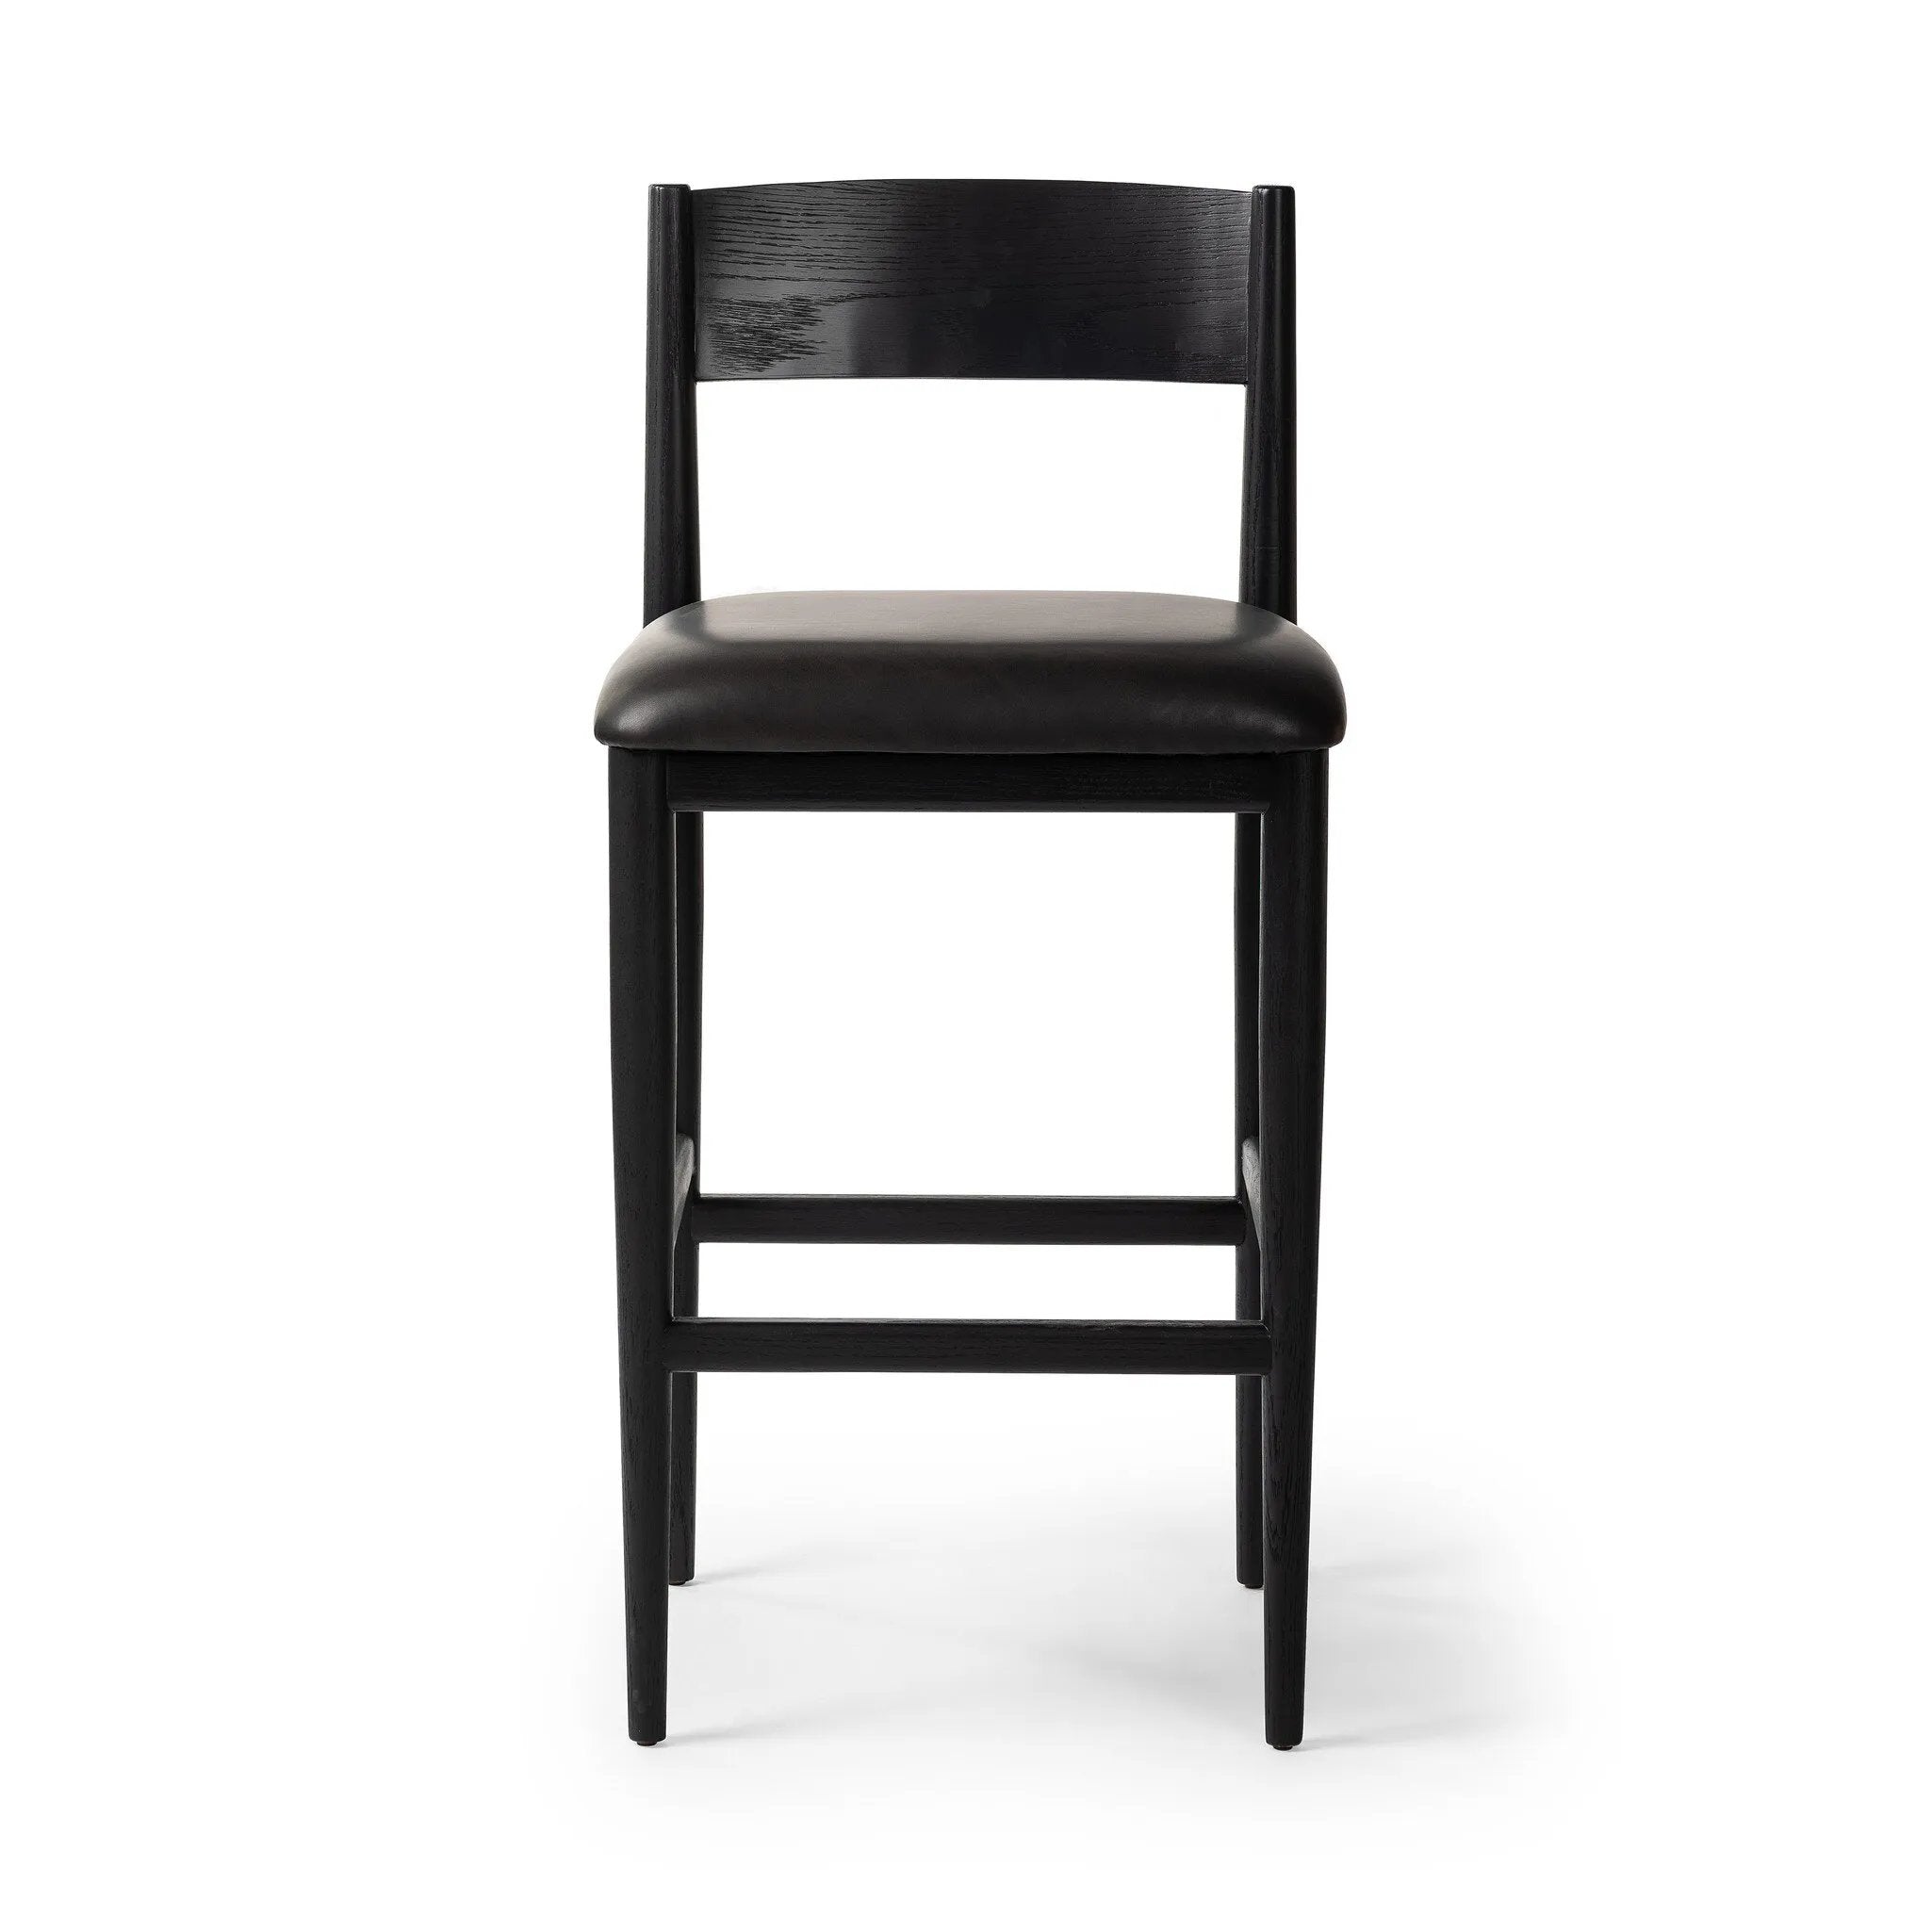 Monochromatic meets midcentury with this bar-height stool. Structured while comfortable, the tapered-leg chair pairs an ebony wood frame with a faux leather cushion.Collection: Ashfor Amethyst Home provides interior design, new home construction design consulting, vintage area rugs, and lighting in the Dallas metro area.